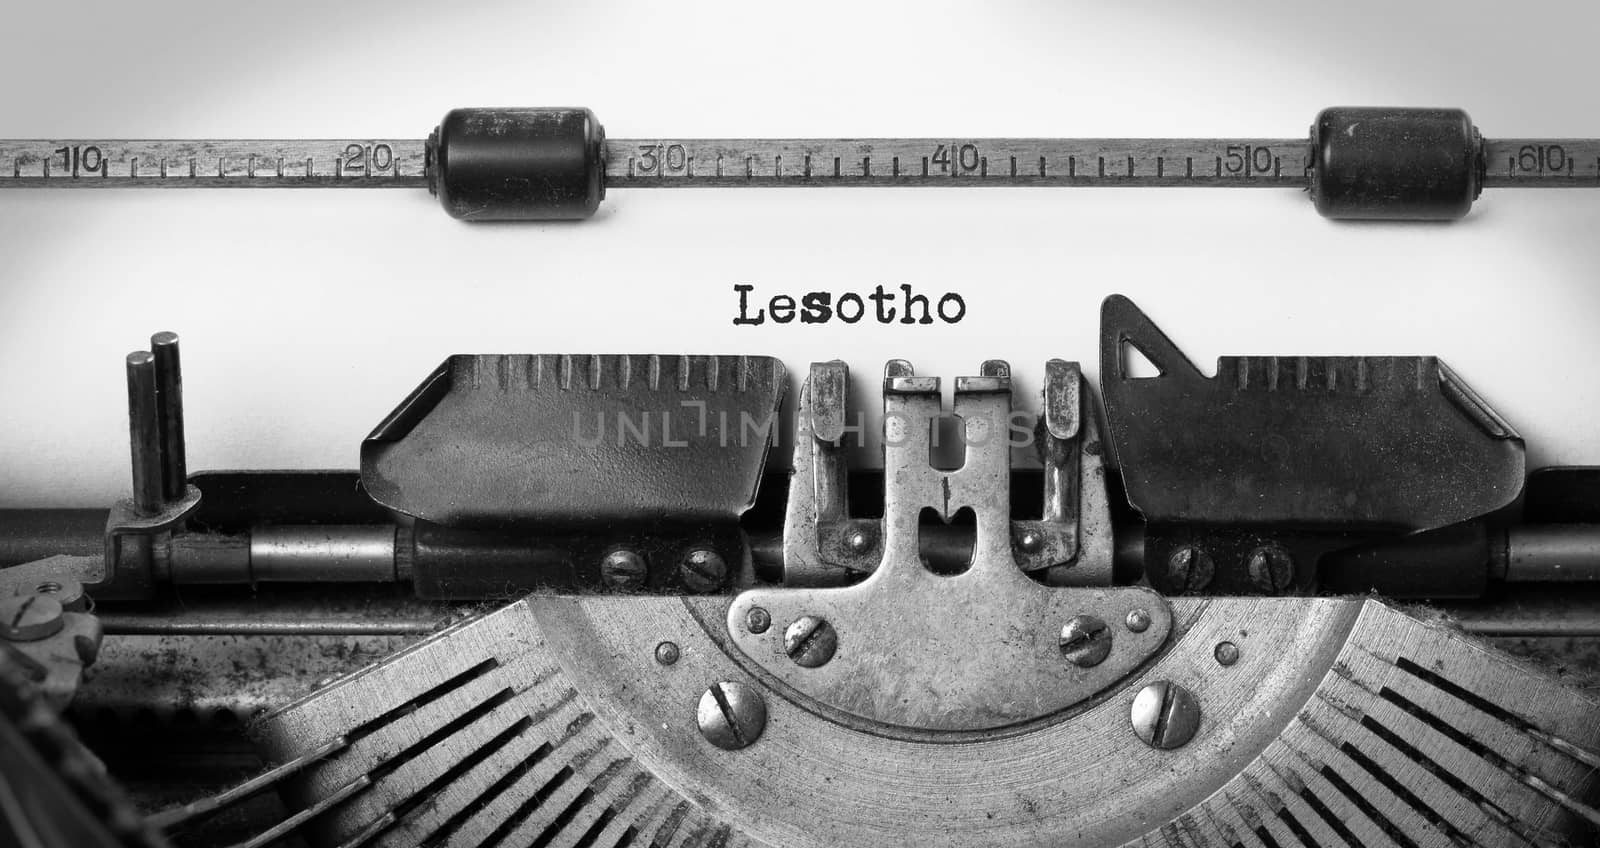 Old typewriter - Lesotho by michaklootwijk